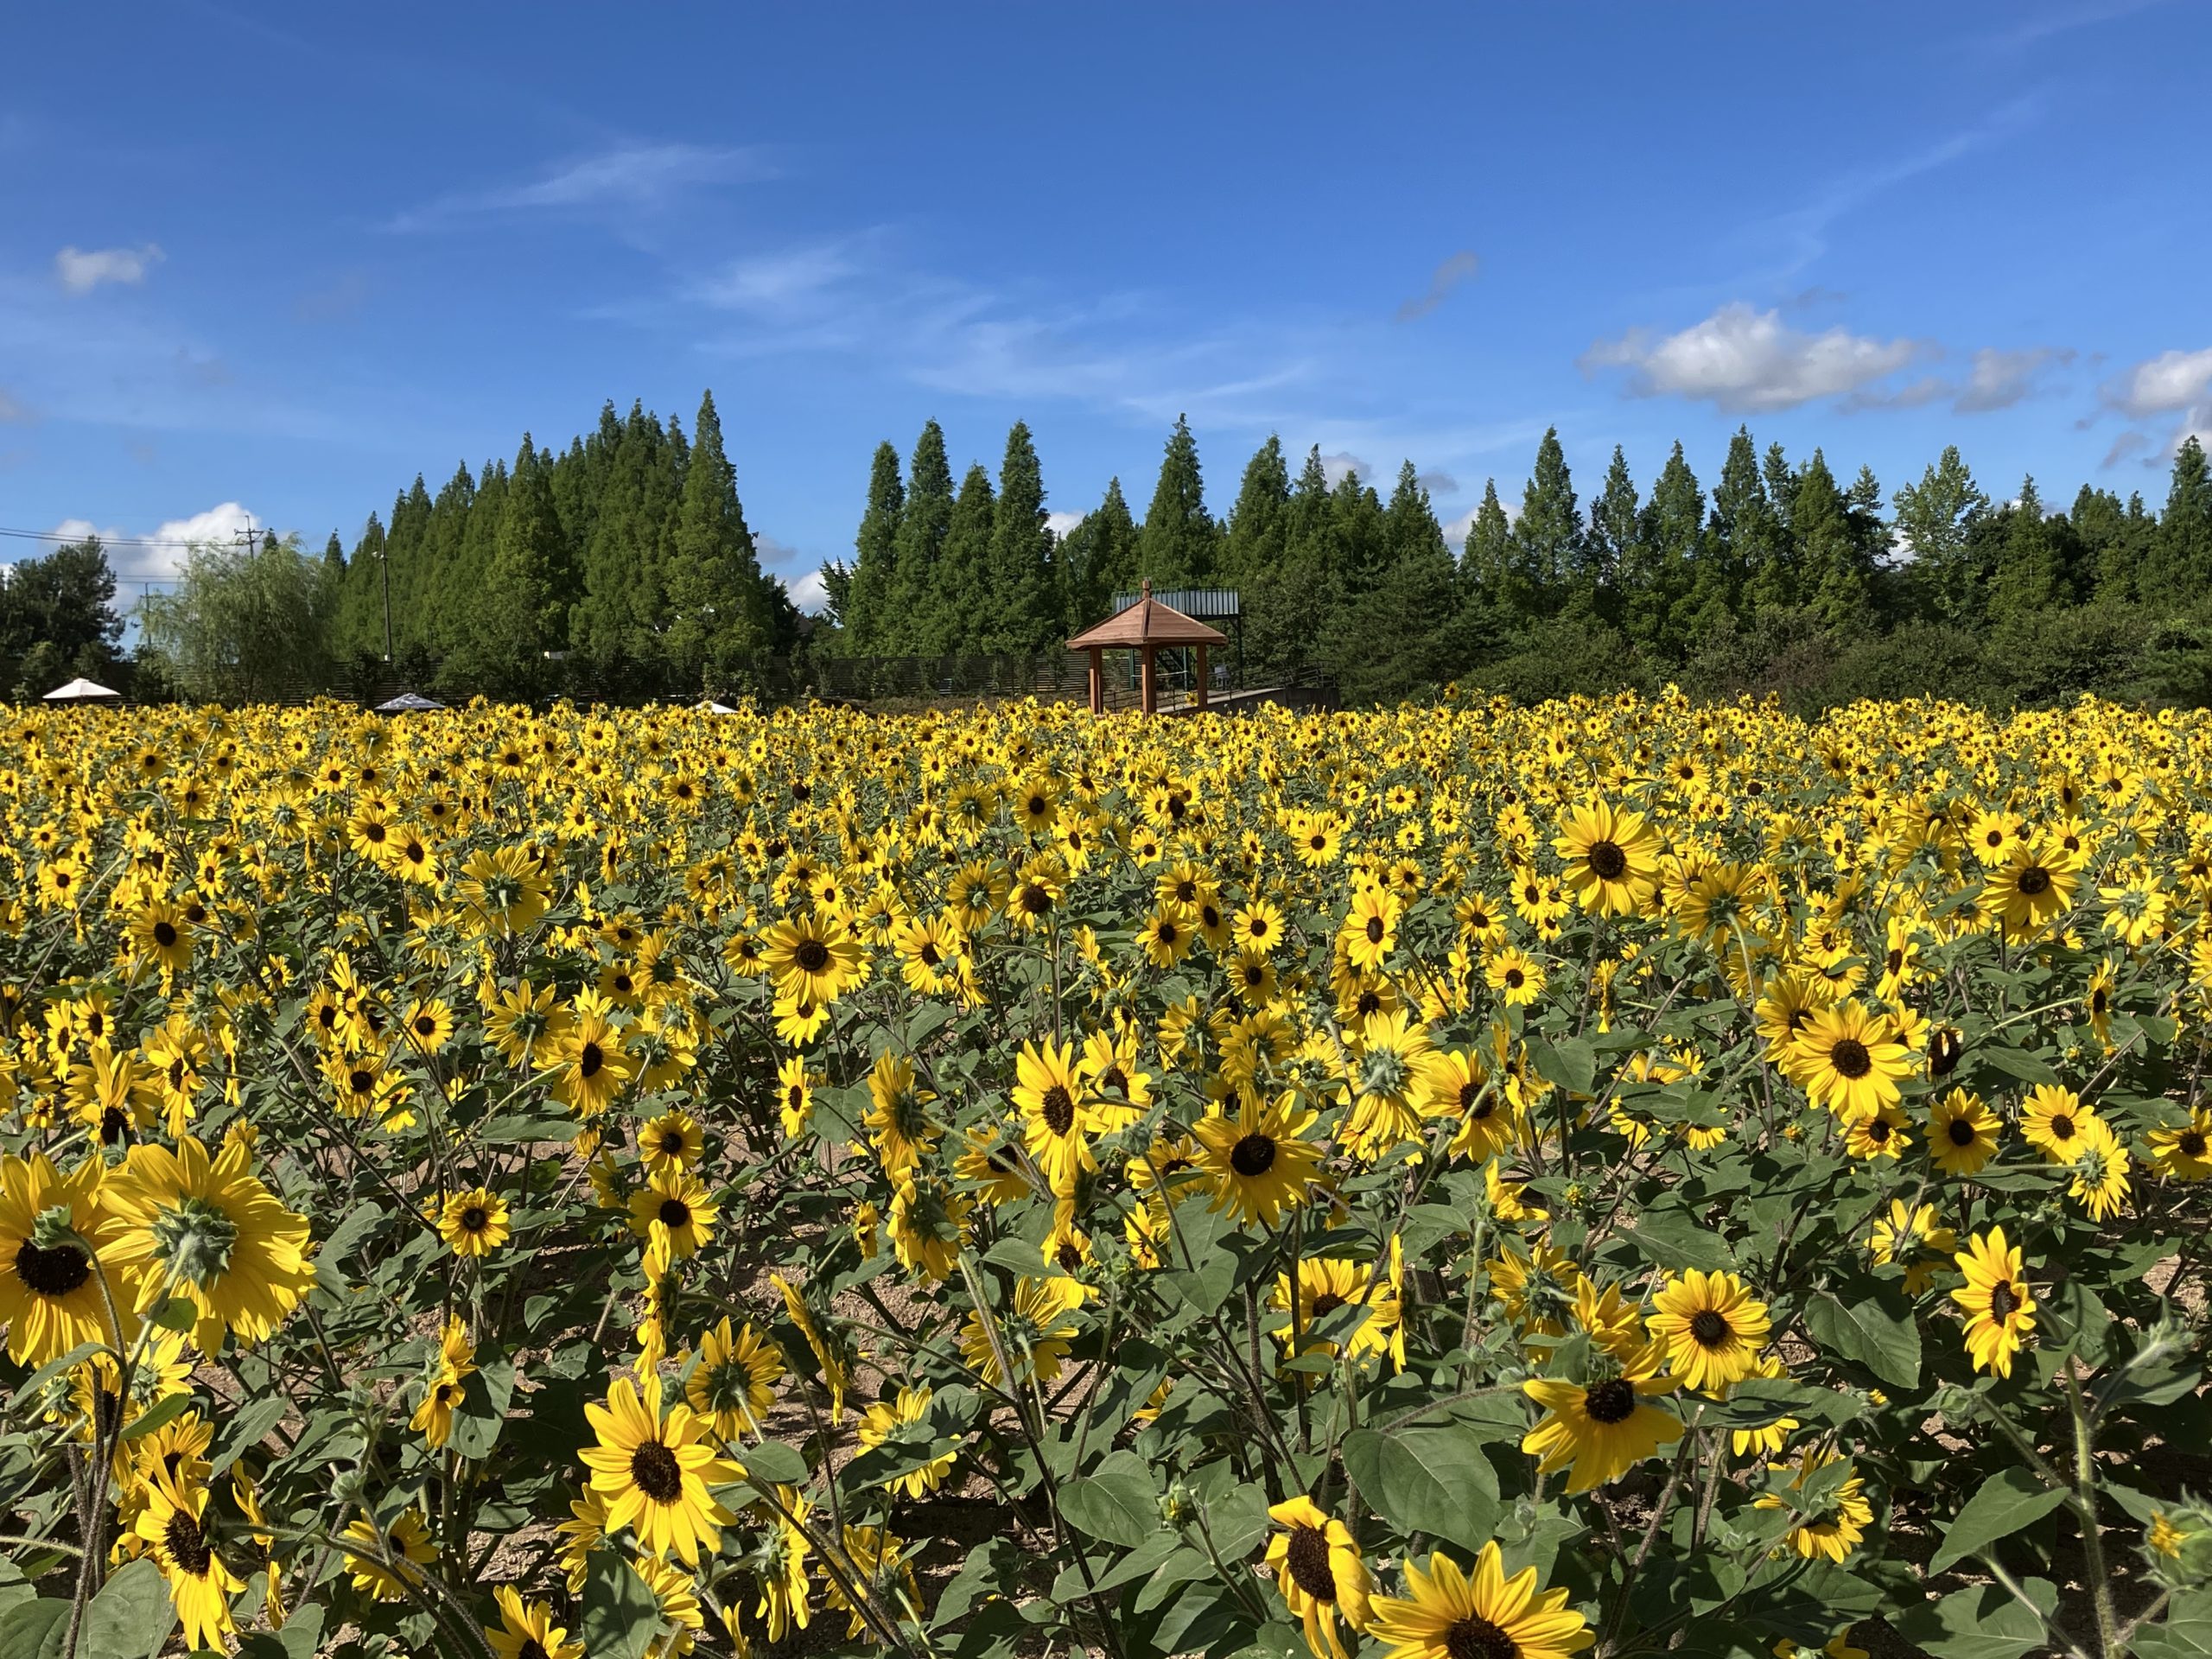 【Park open】Sunflower≪beginning to bloom（Some flowers are in full bloom）≫